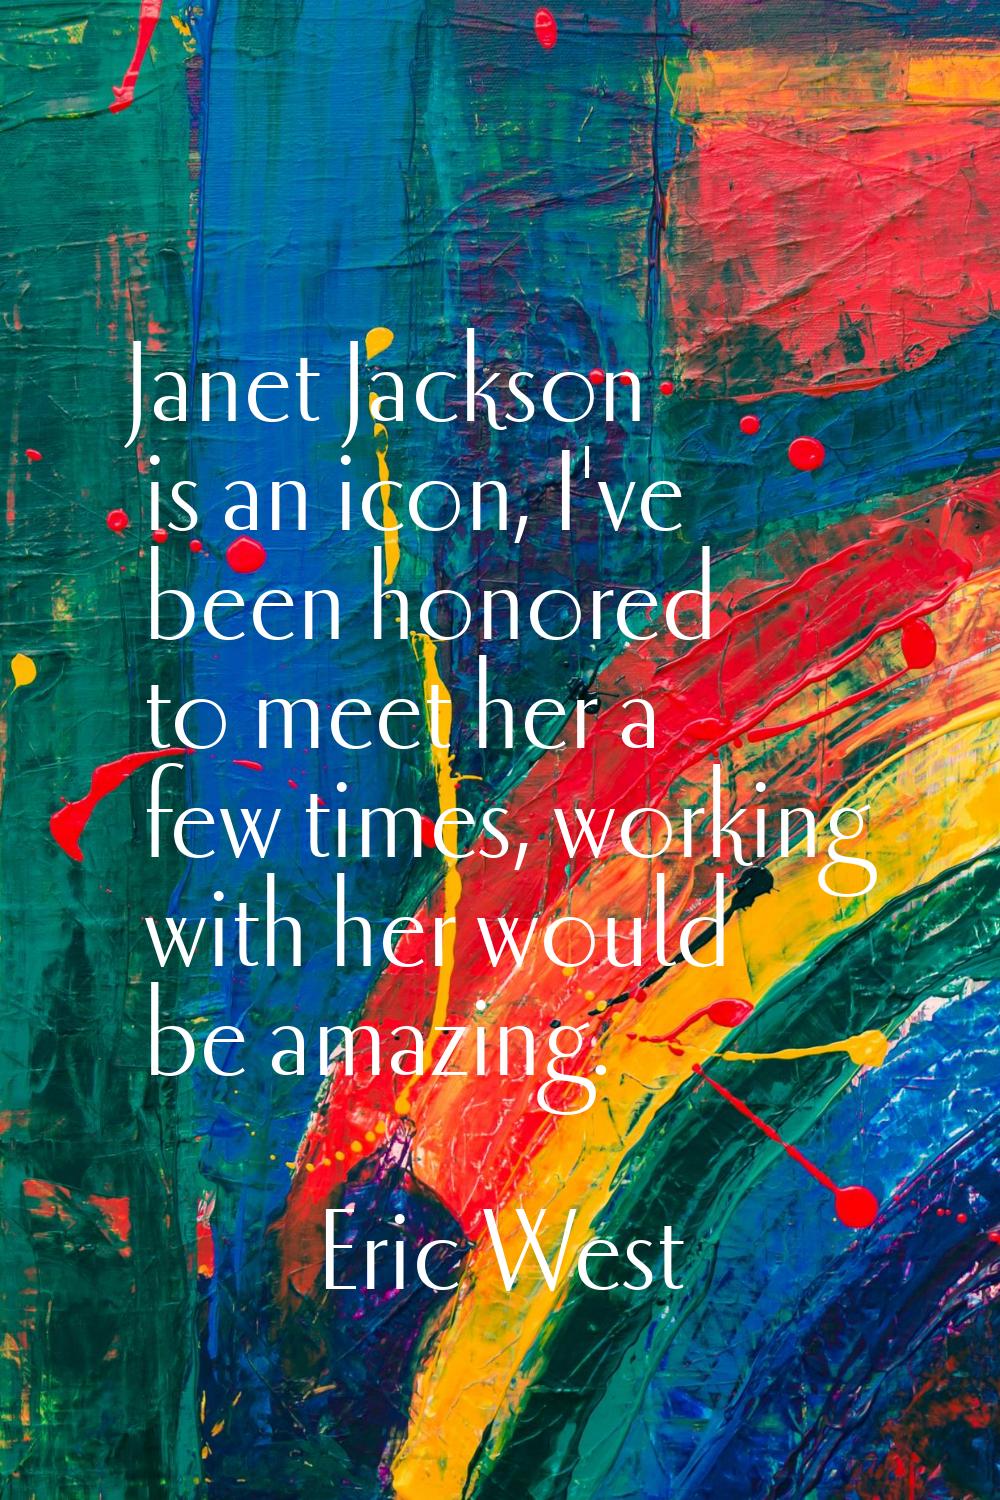 Janet Jackson is an icon, I've been honored to meet her a few times, working with her would be amaz